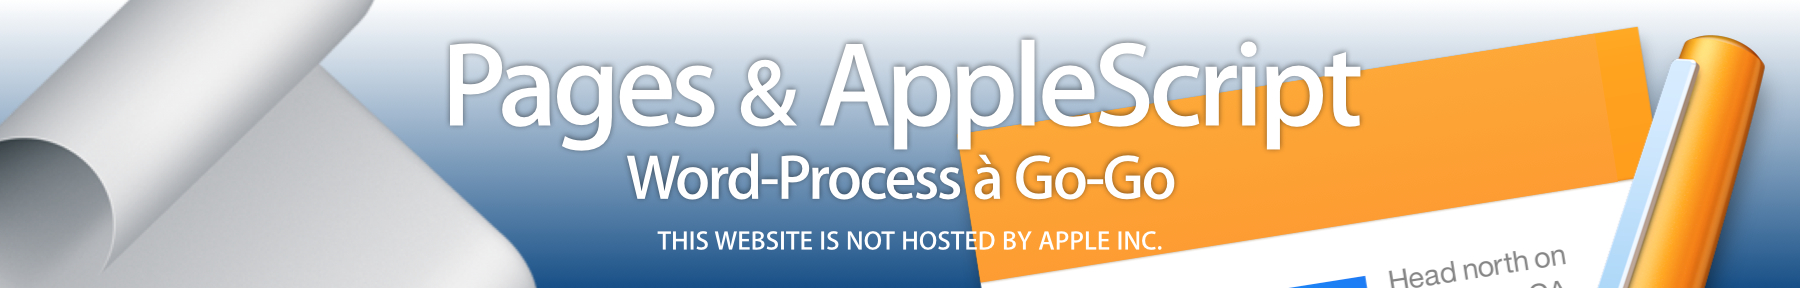 AppleScript and Pages: Word-Process a Go-Go!